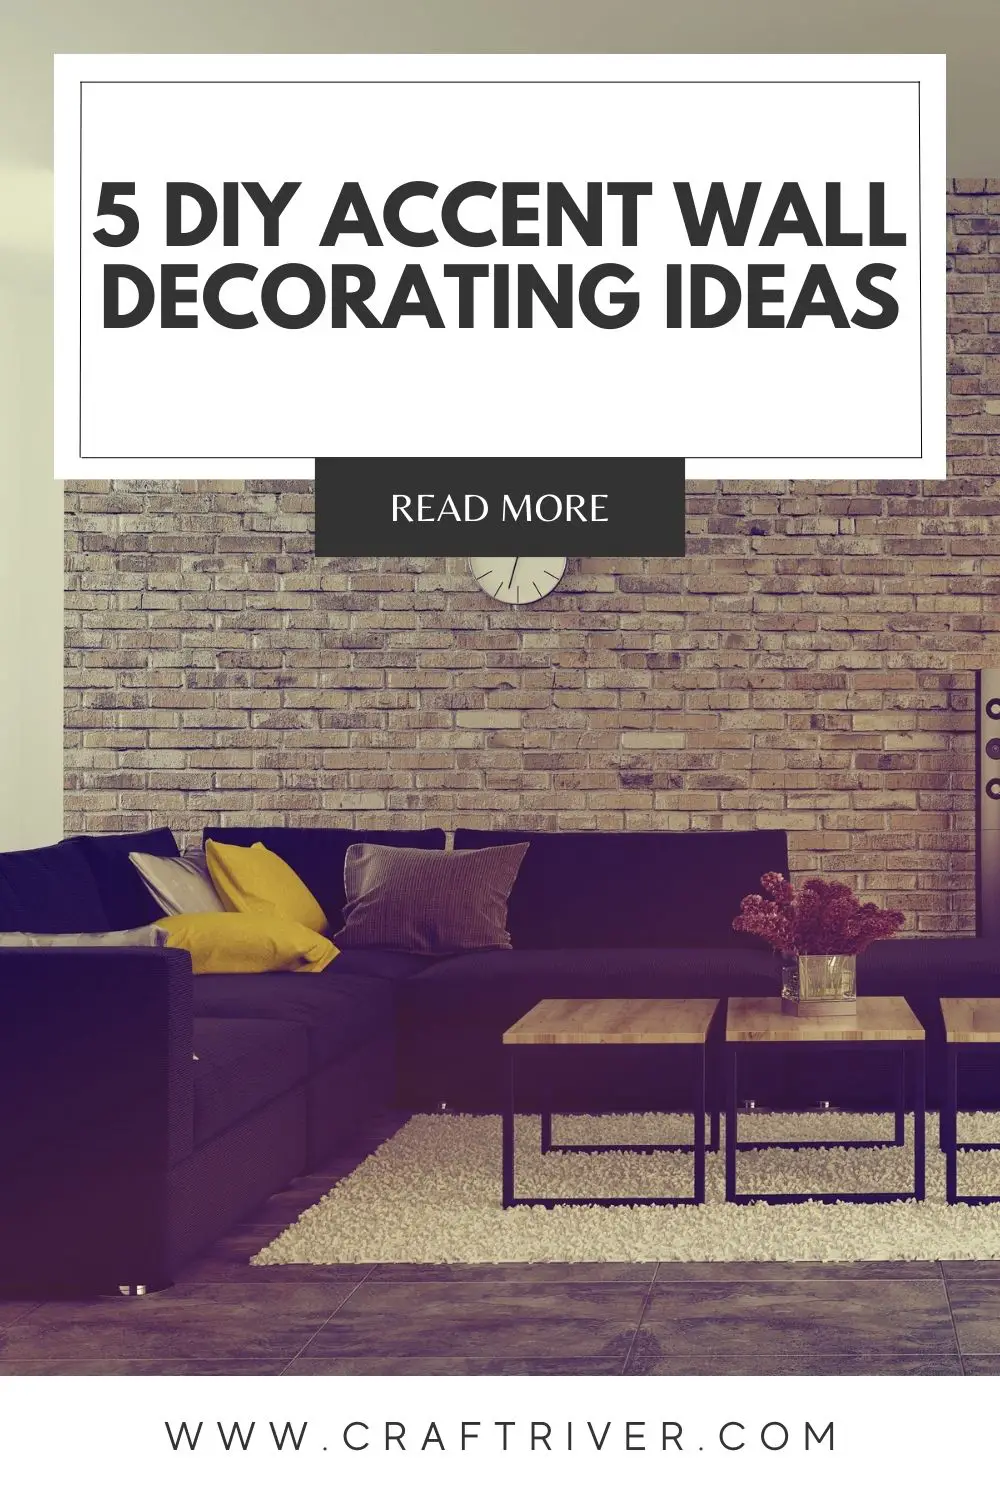 Accent Wall Decorating Ideas